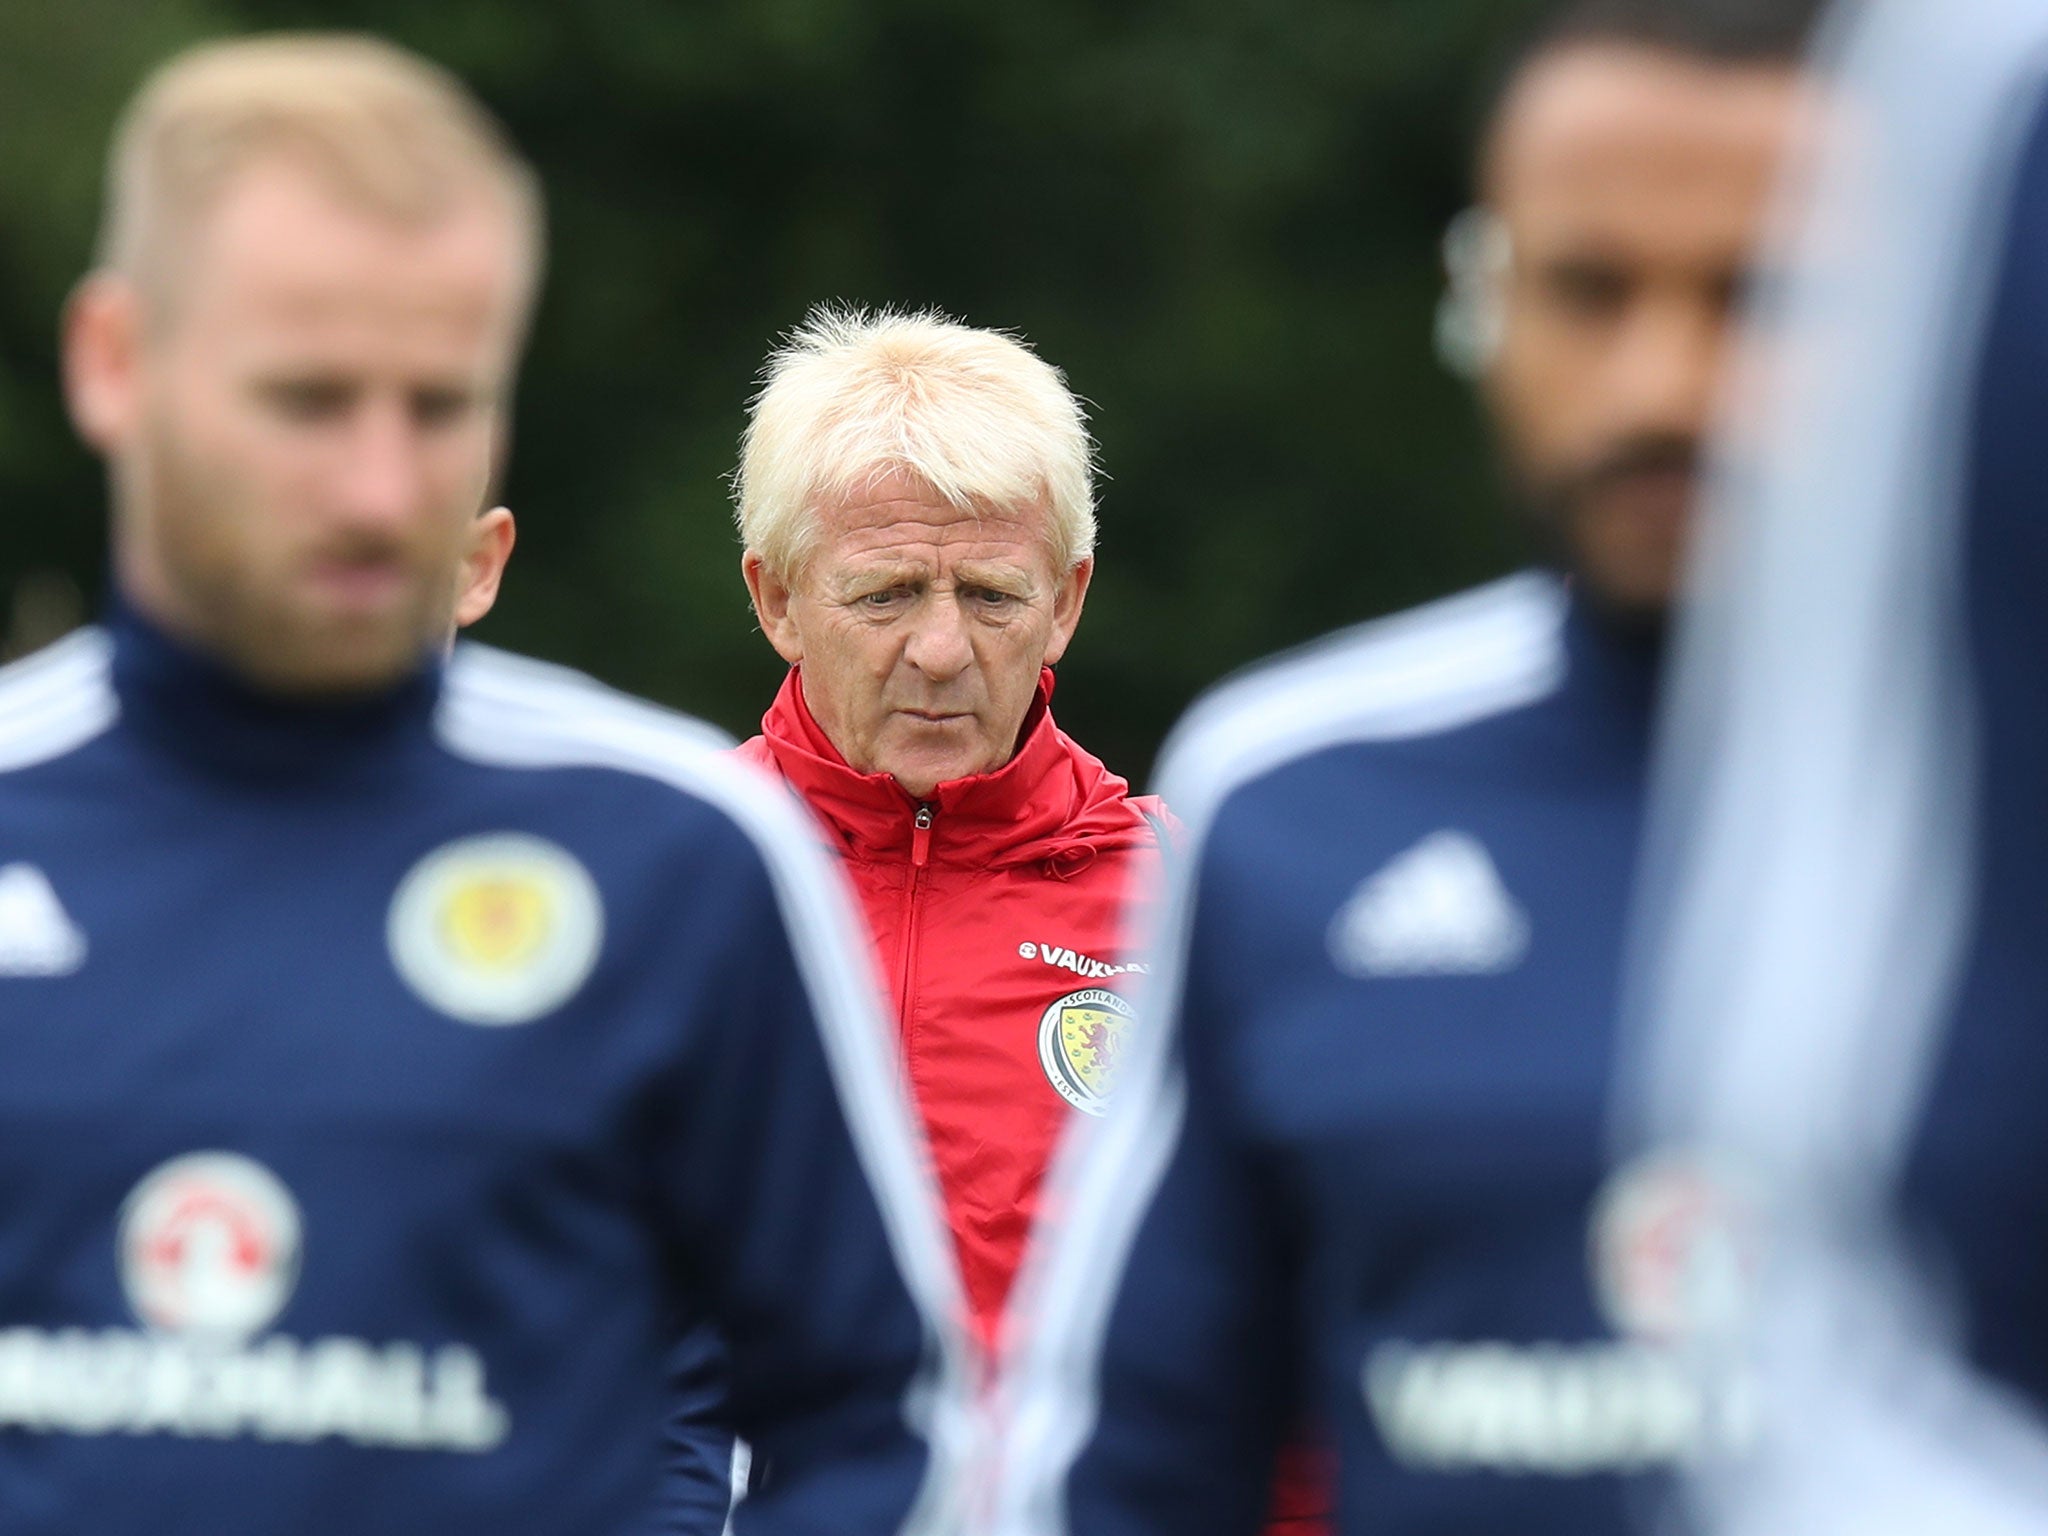 &#13;
Gordon Strachan in training with his Scotland side &#13;